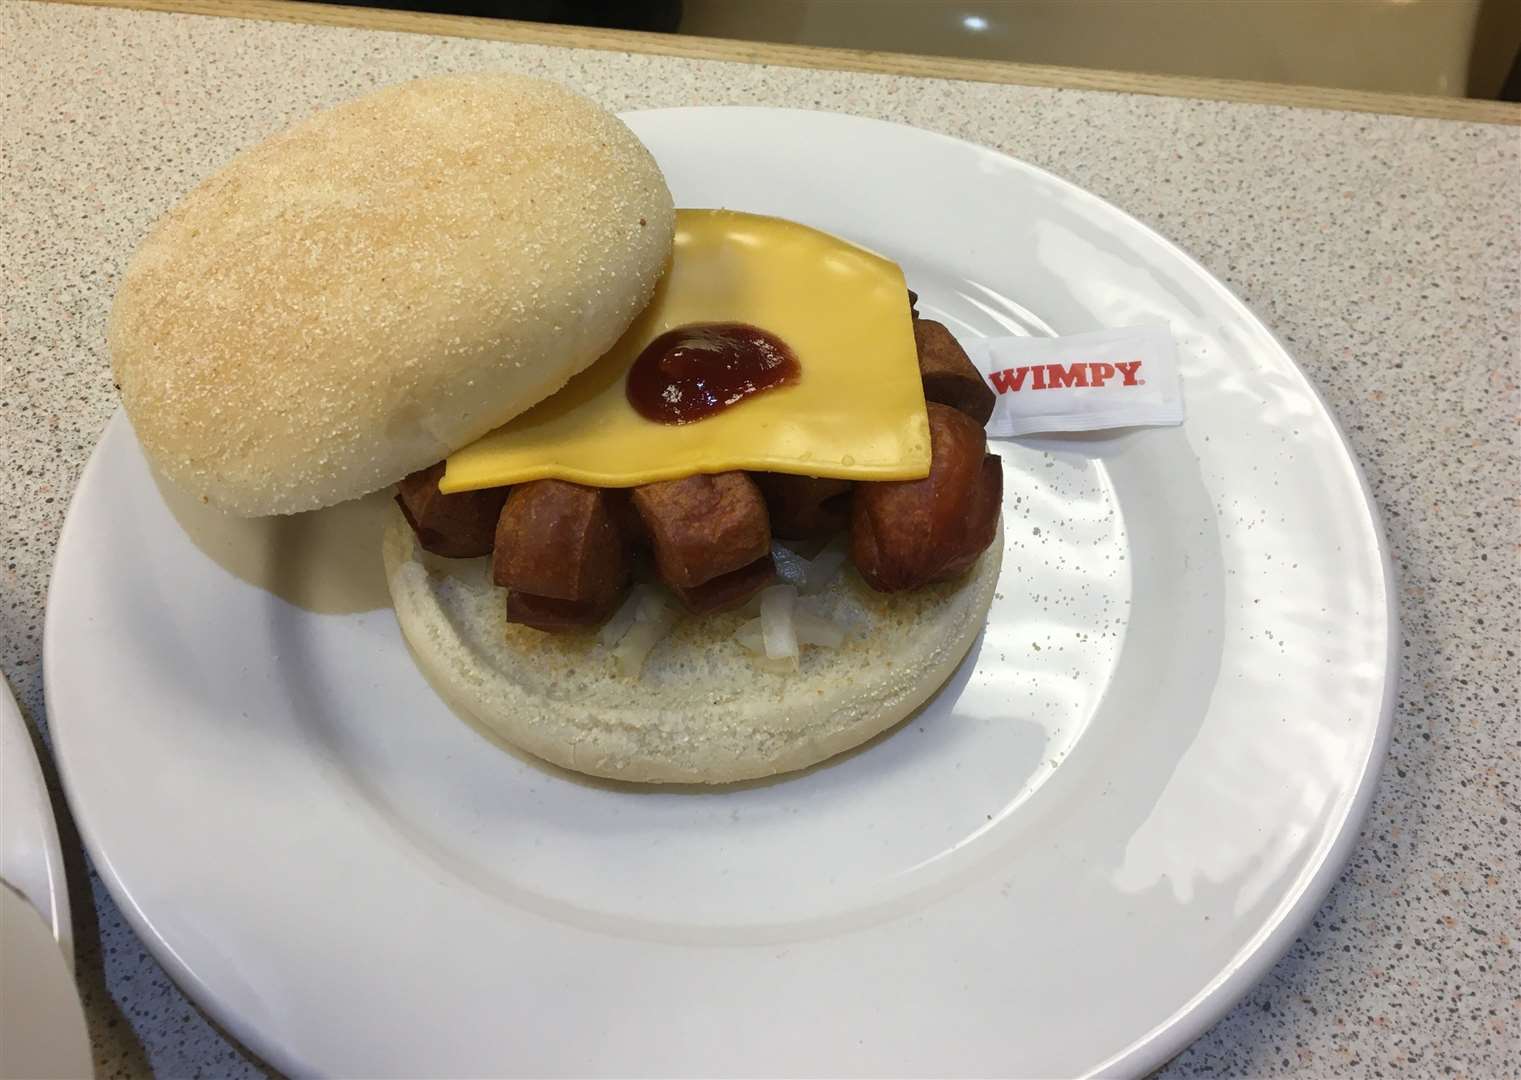 Wimpy's Bender in a Bun Picture: KMG